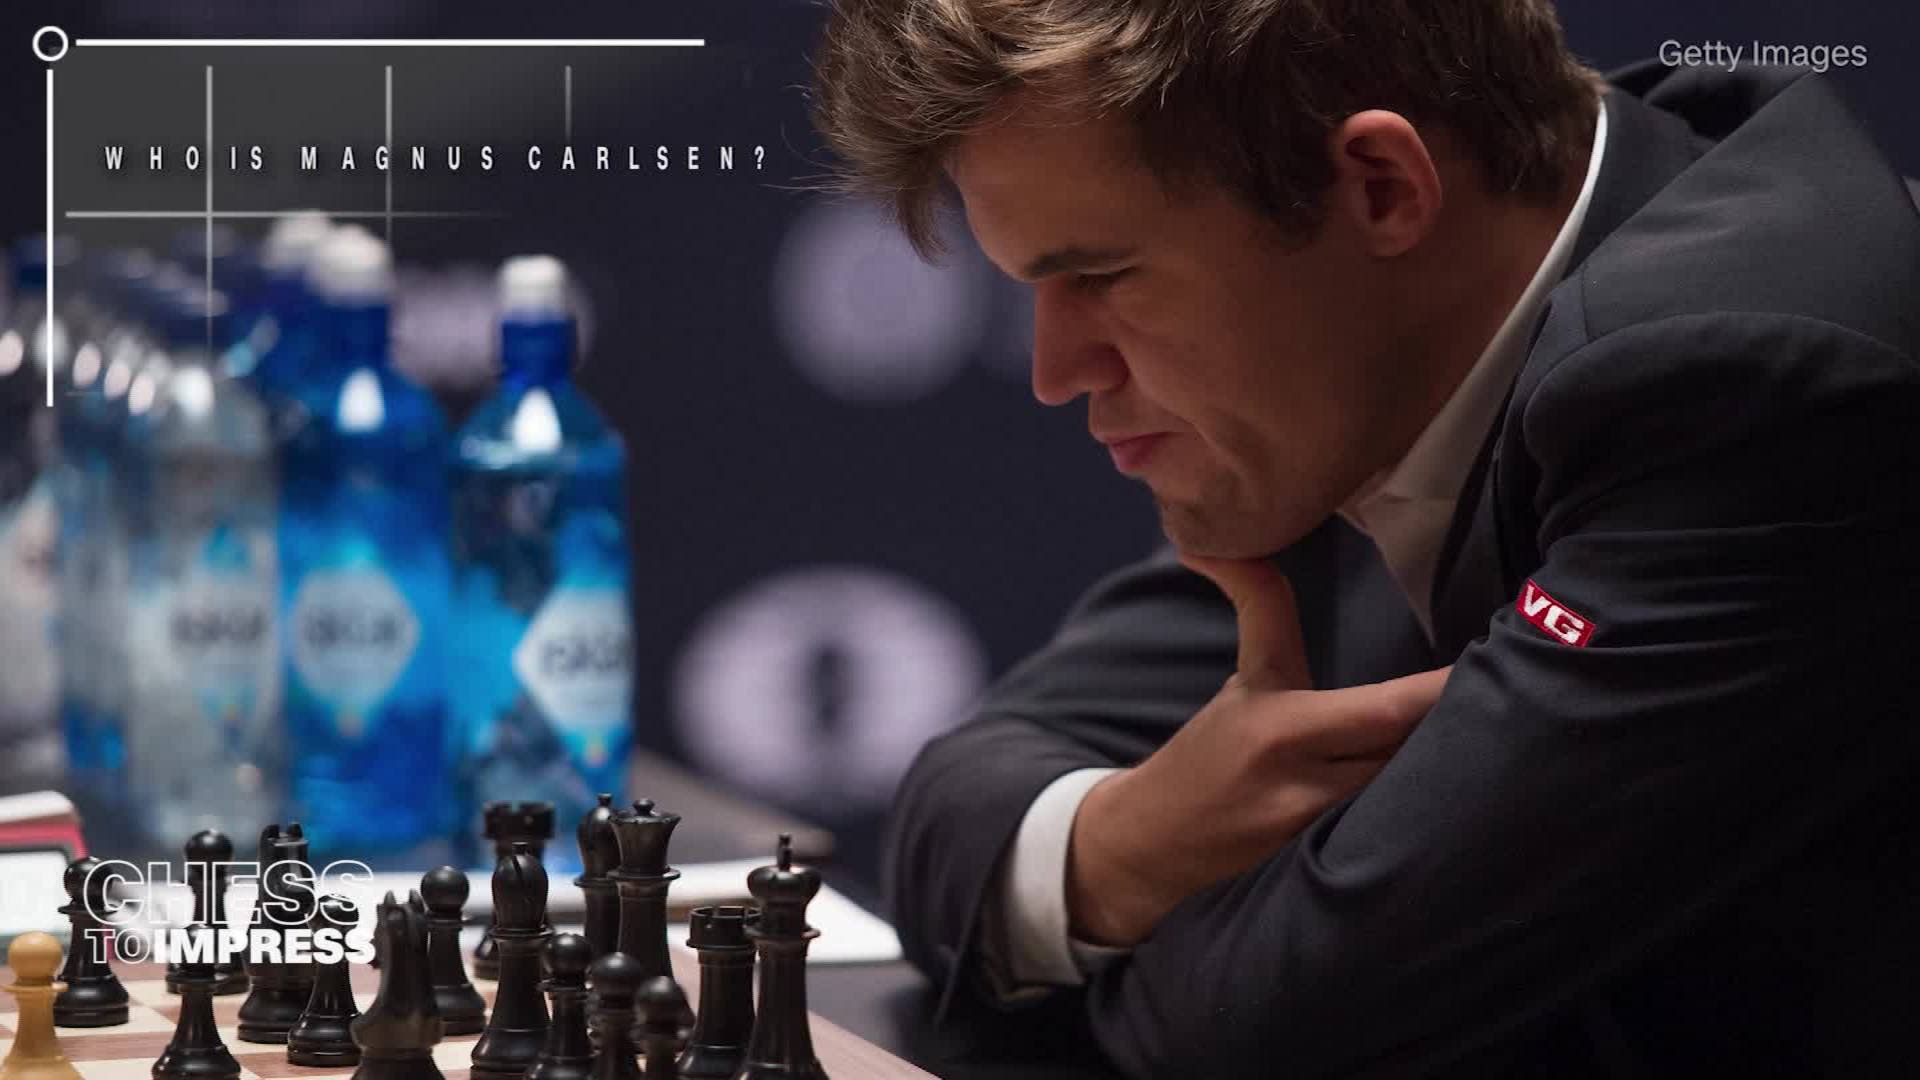 Chess: Magnus Carlsen makes history with eighth successive title, will  reach highest ever Elo rating